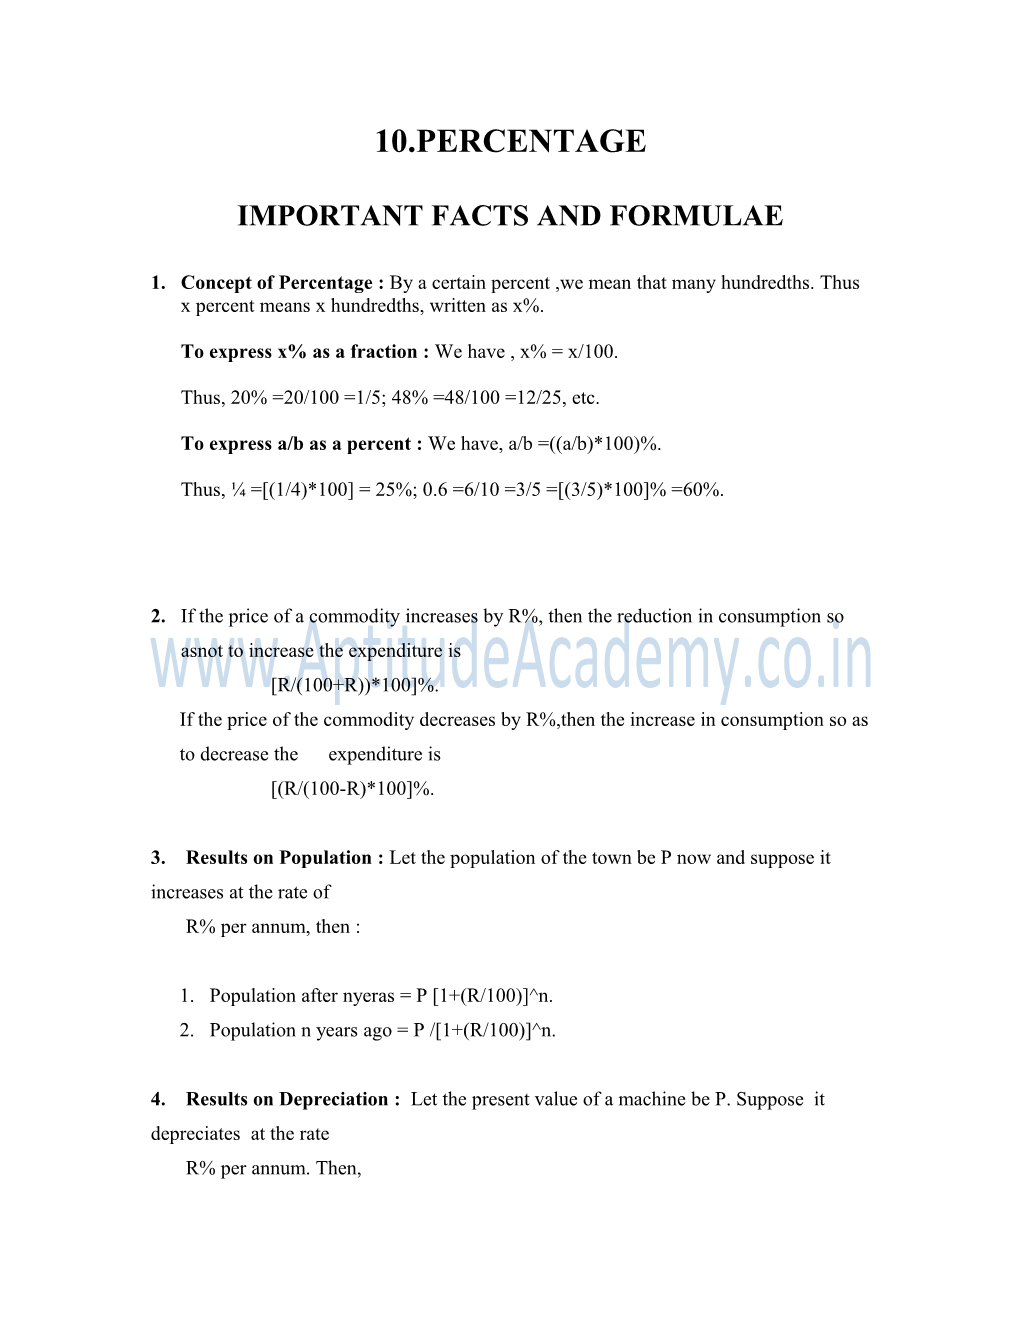 Important Facts and Formulae